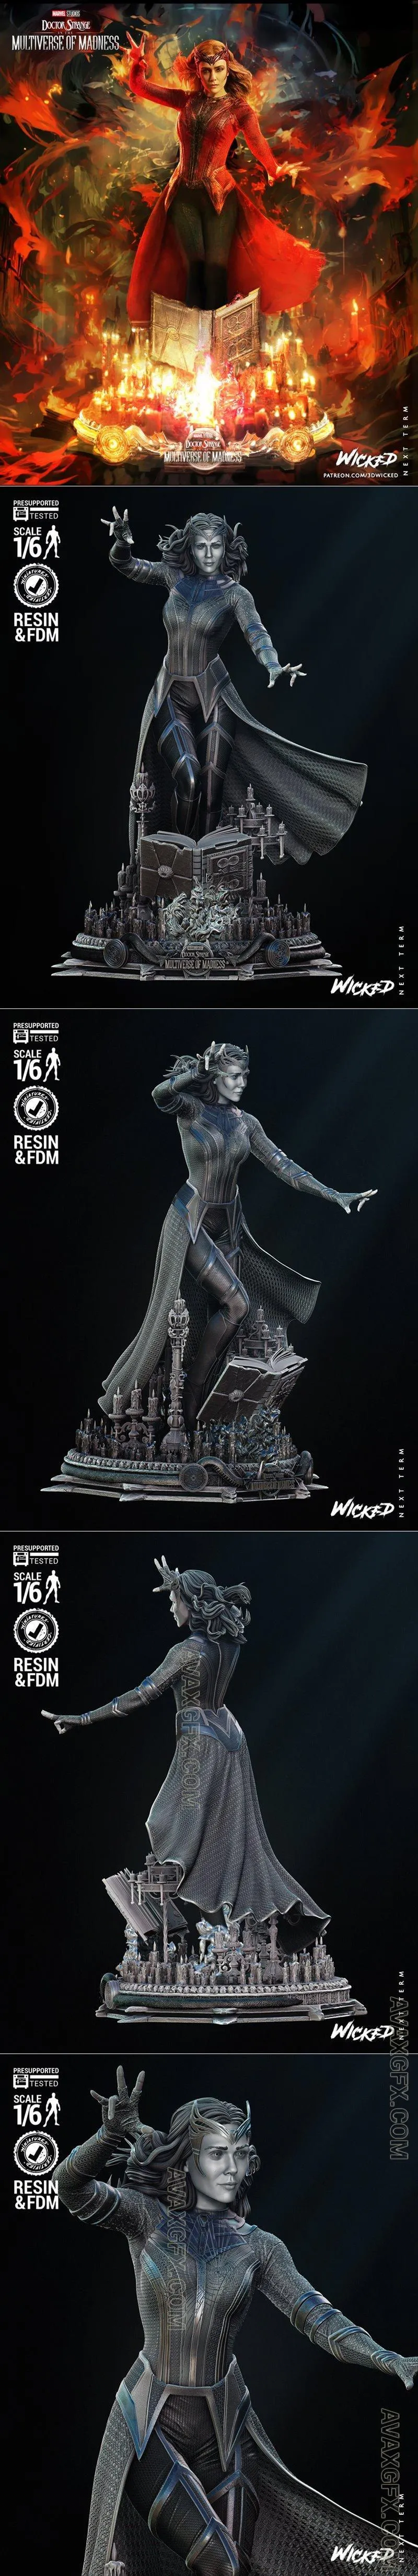 WICKED - Scarlet Witch Sculpture - STL 3D Model